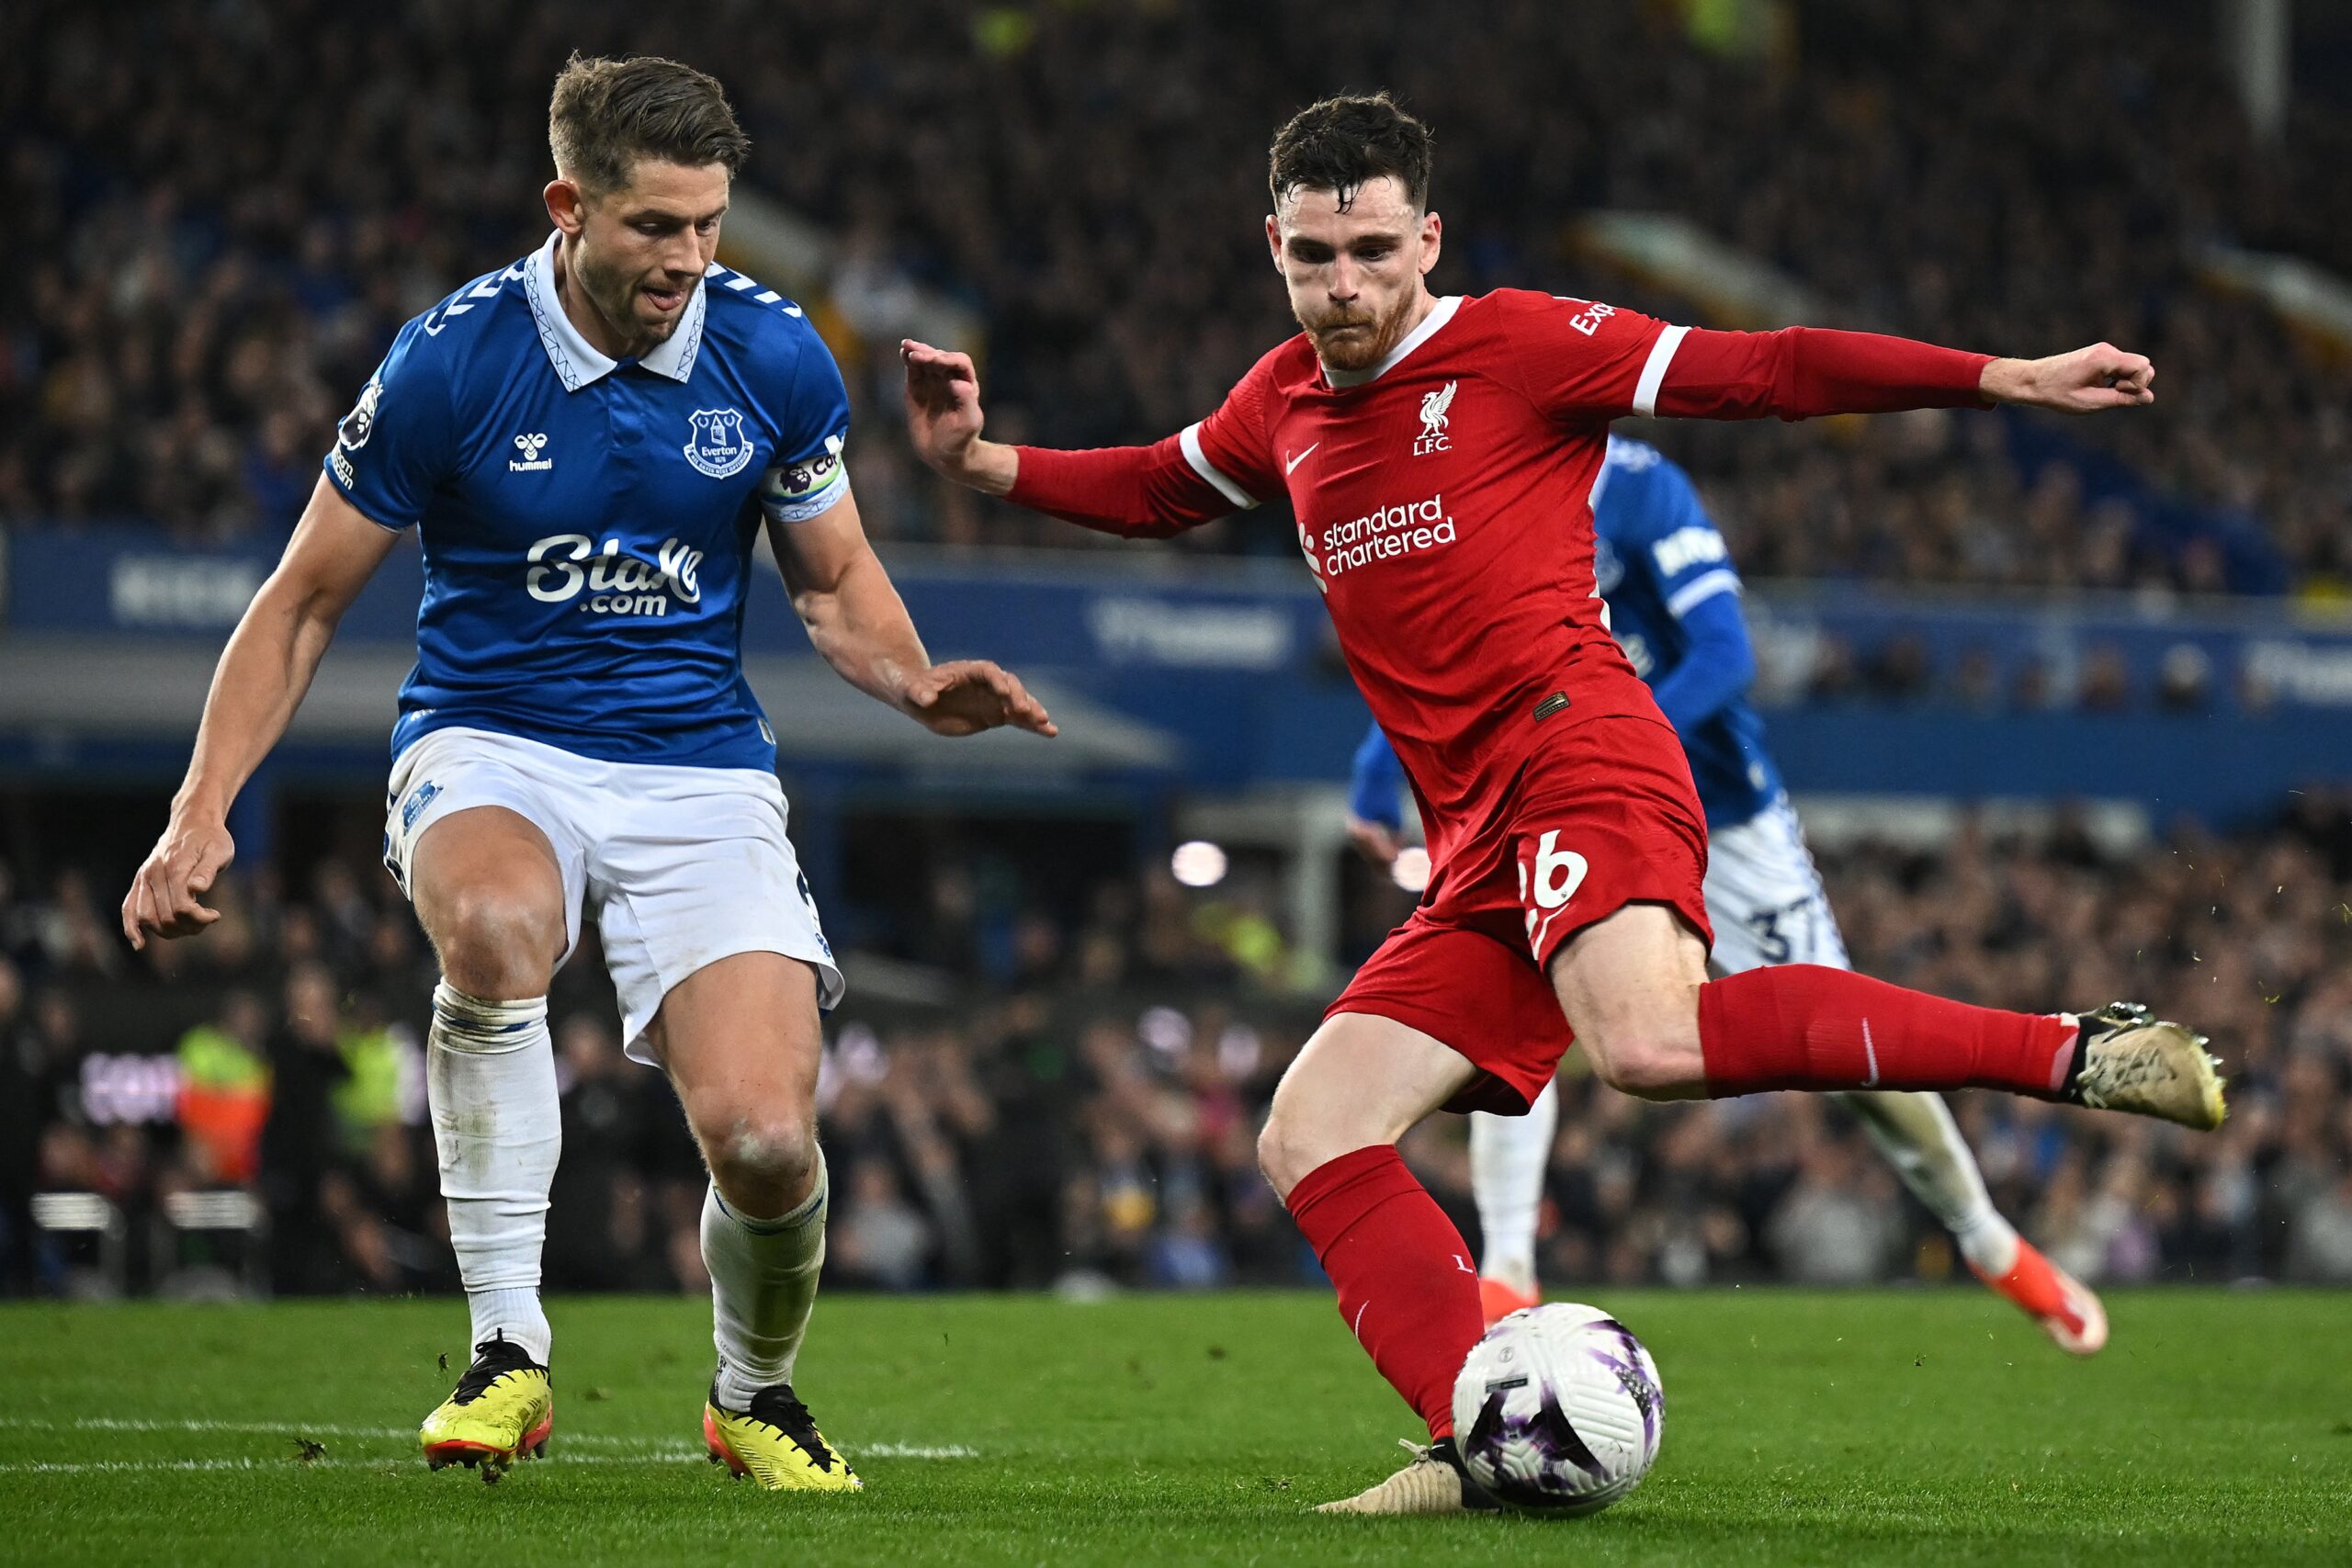 Liverpool Lose At Everton To Leave Premier League Hopes In Ruins